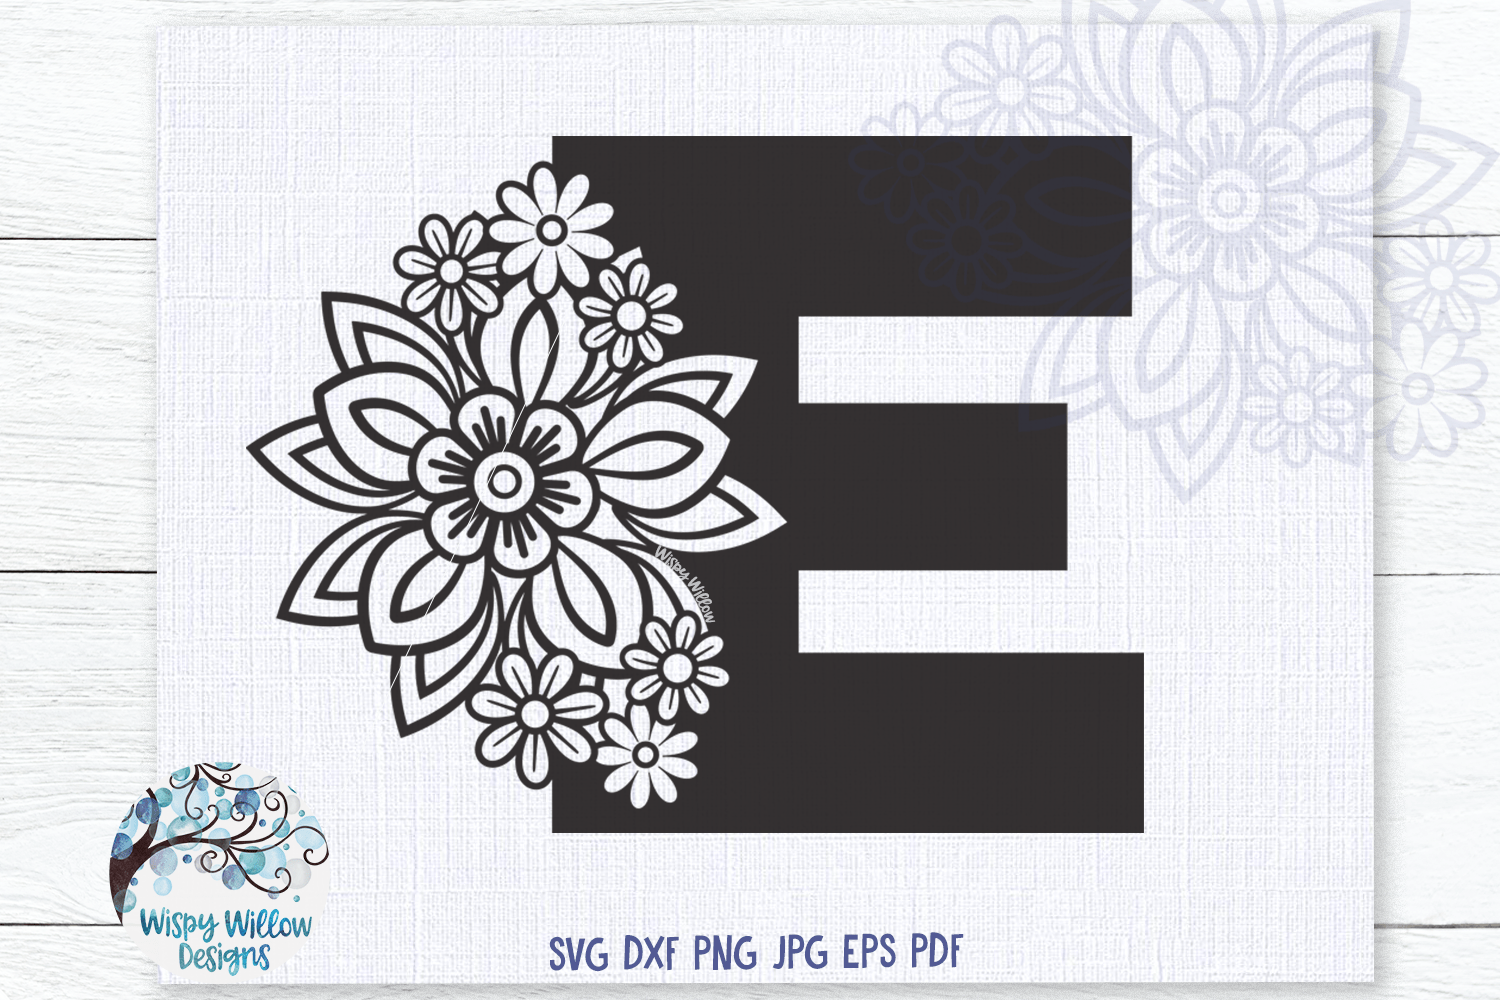 Floral Letter E SVG Wispy Willow Designs Company